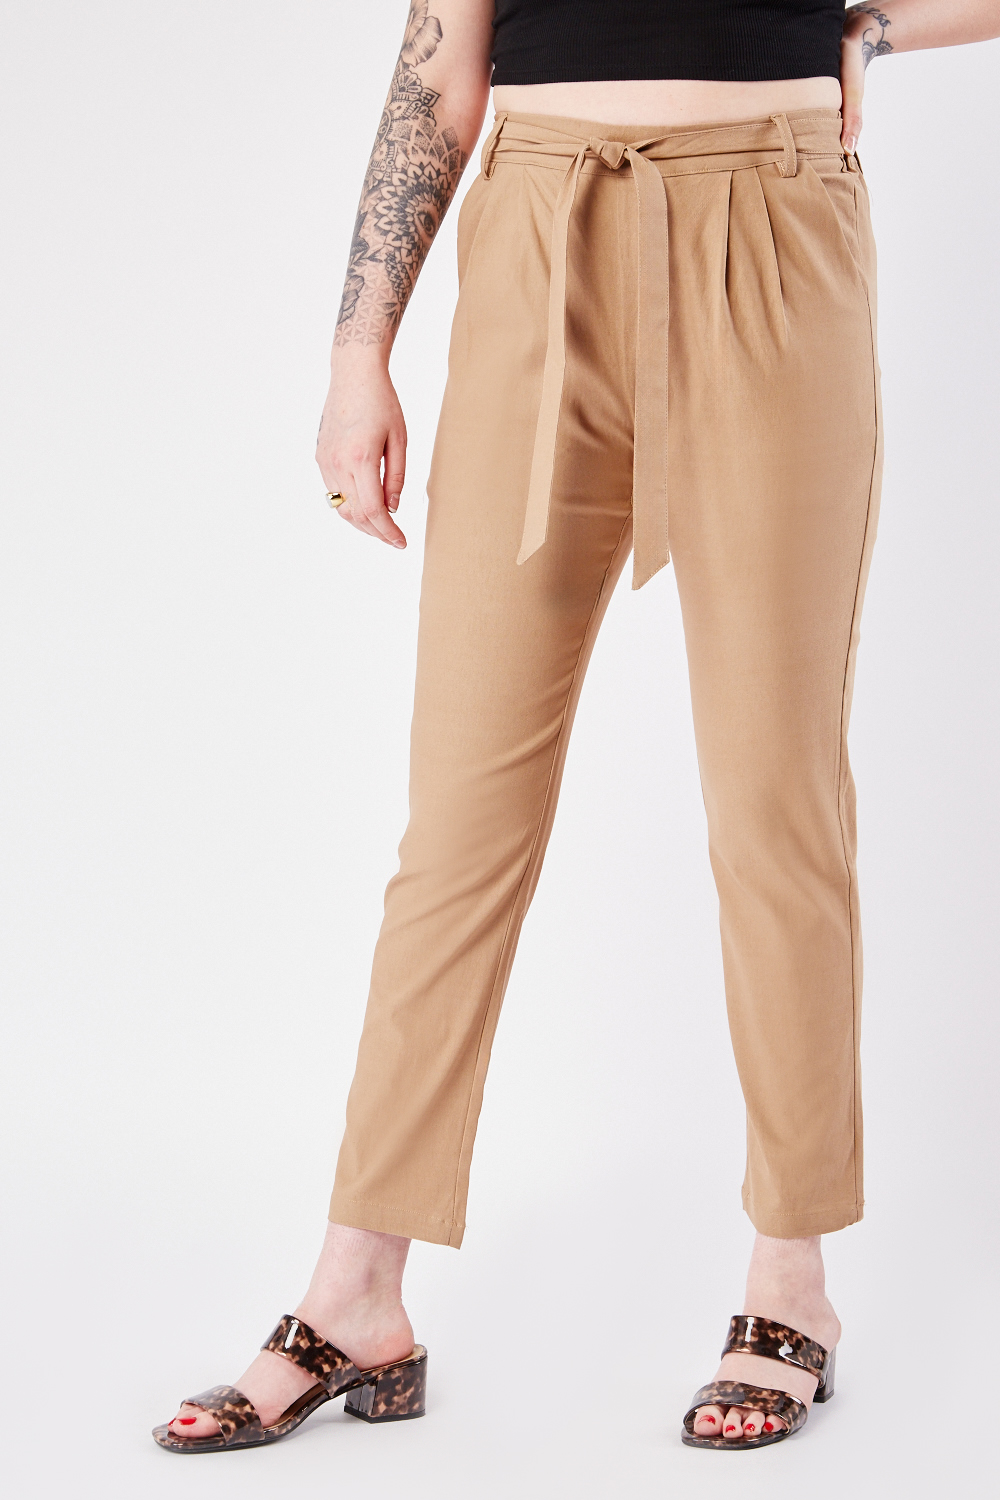 High Waist Tie Up Trousers